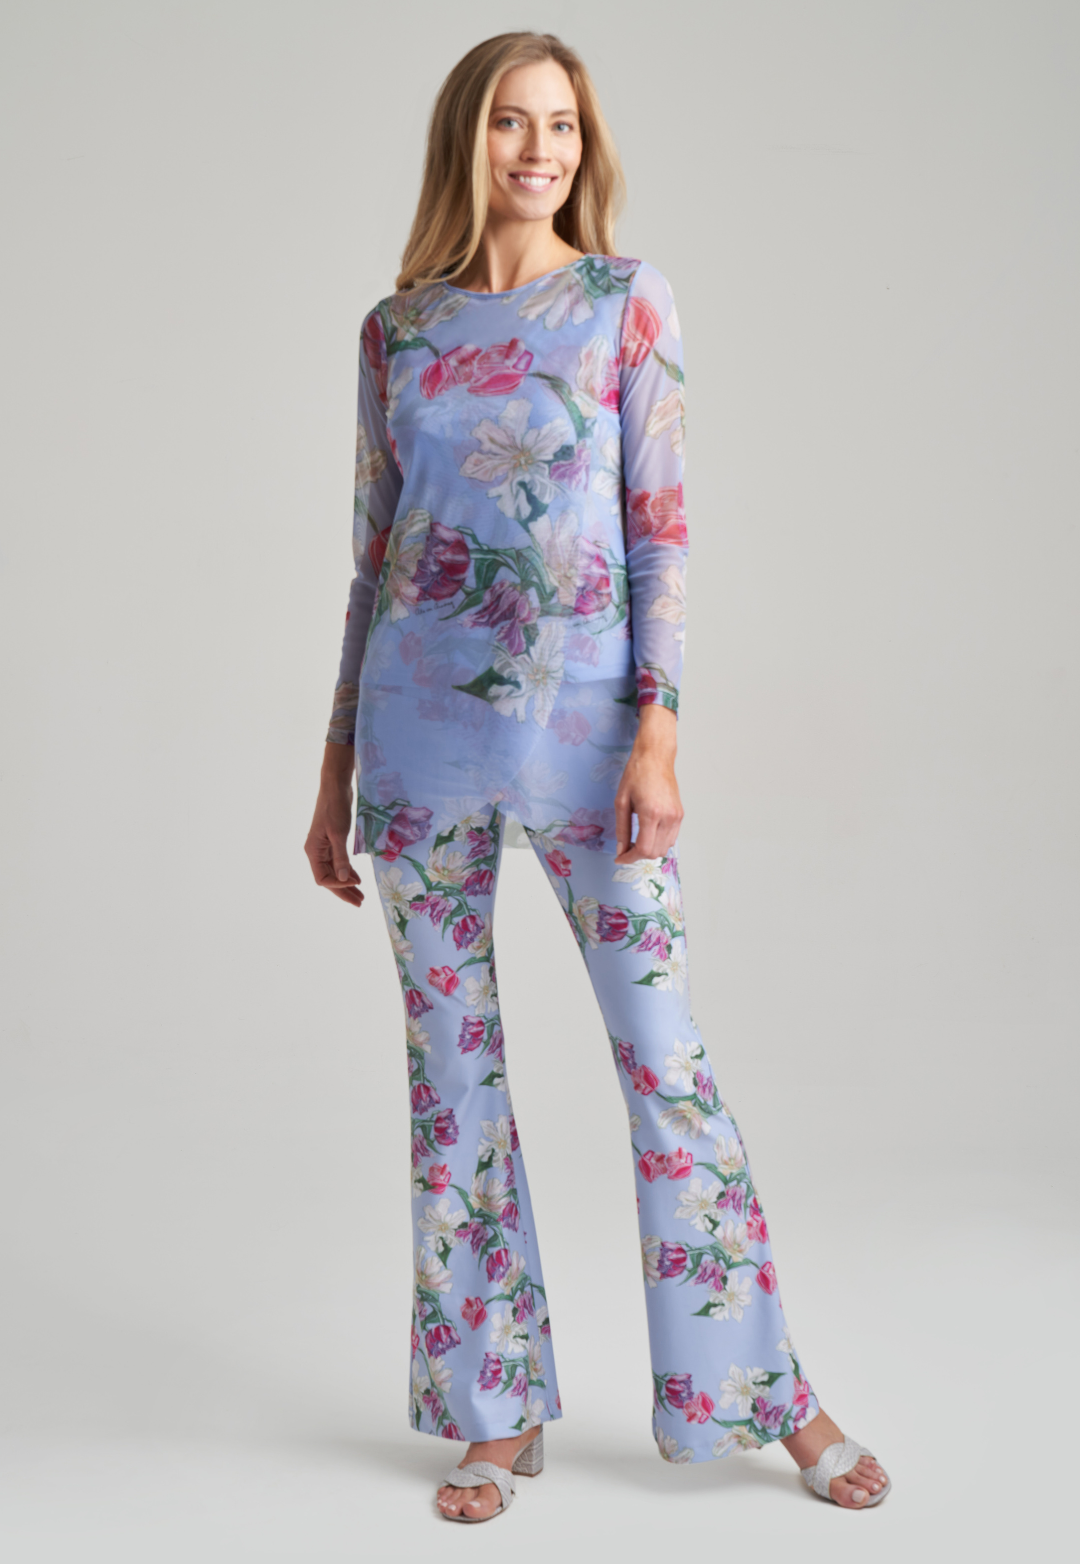 woman wearing stretch knit tank top and stretch knit pants in tulip print with mesh tulip printed tunic by Ala von Auersperg for spring summer 2021